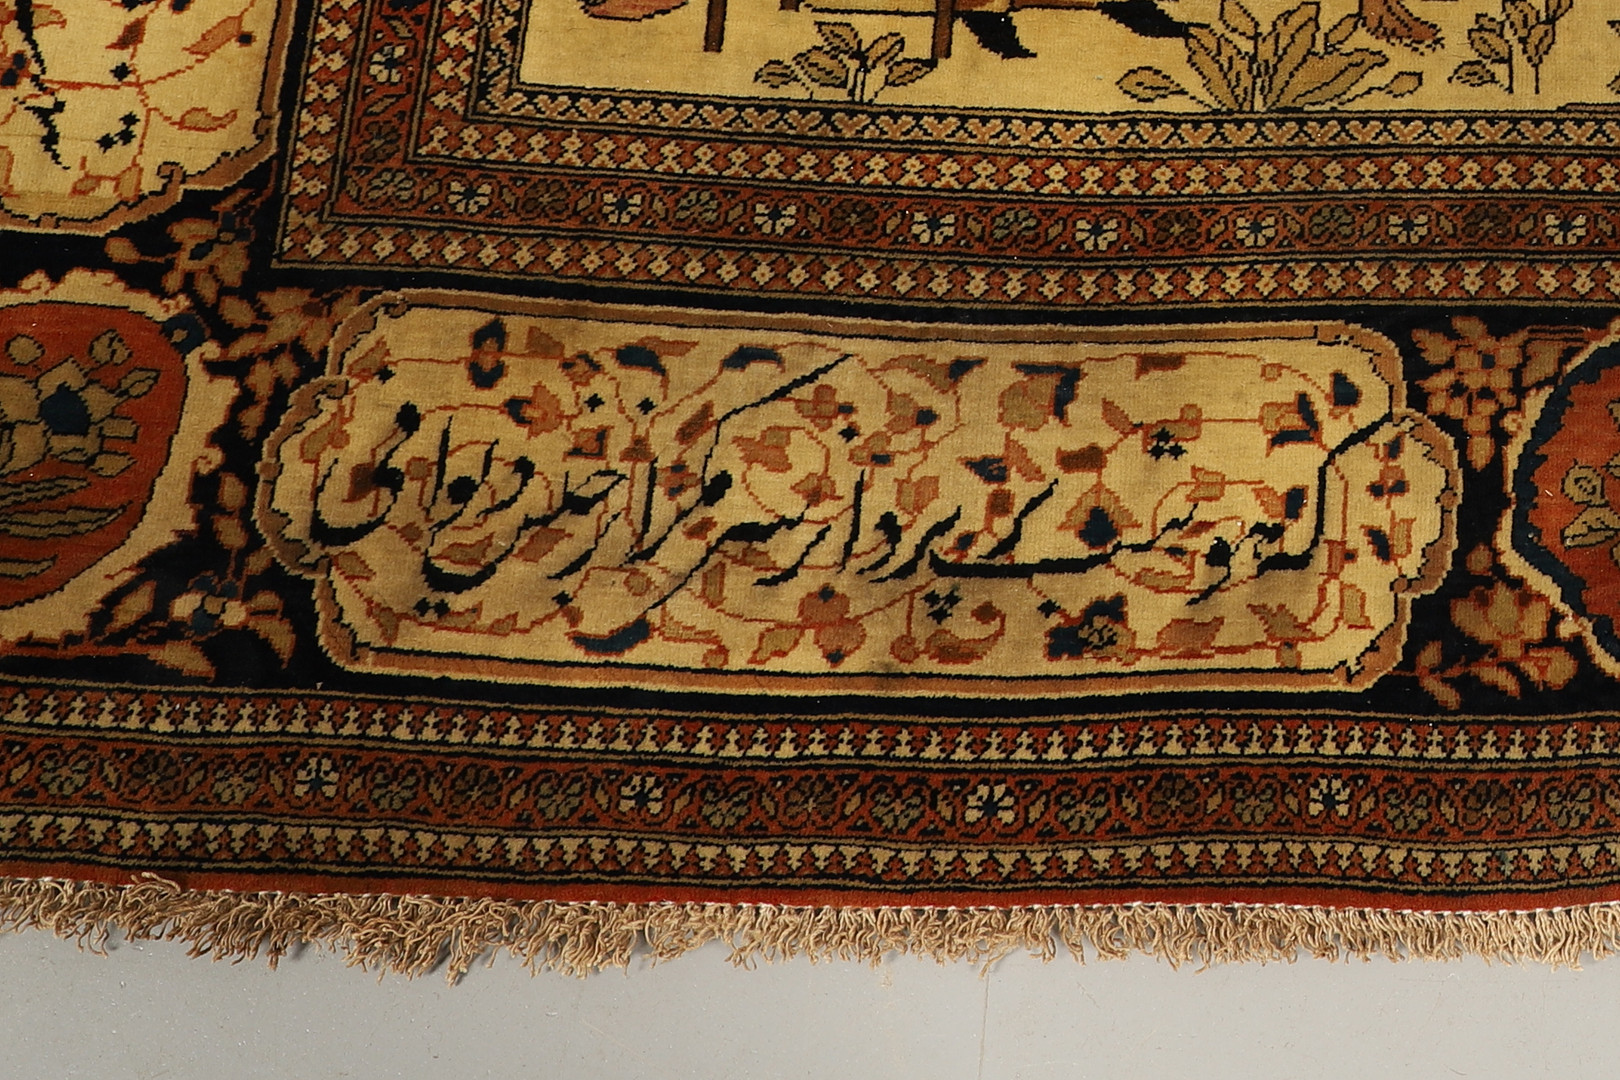 A FINE KASHAN RUG, CENTRAL PERSIA - Image 14 of 16